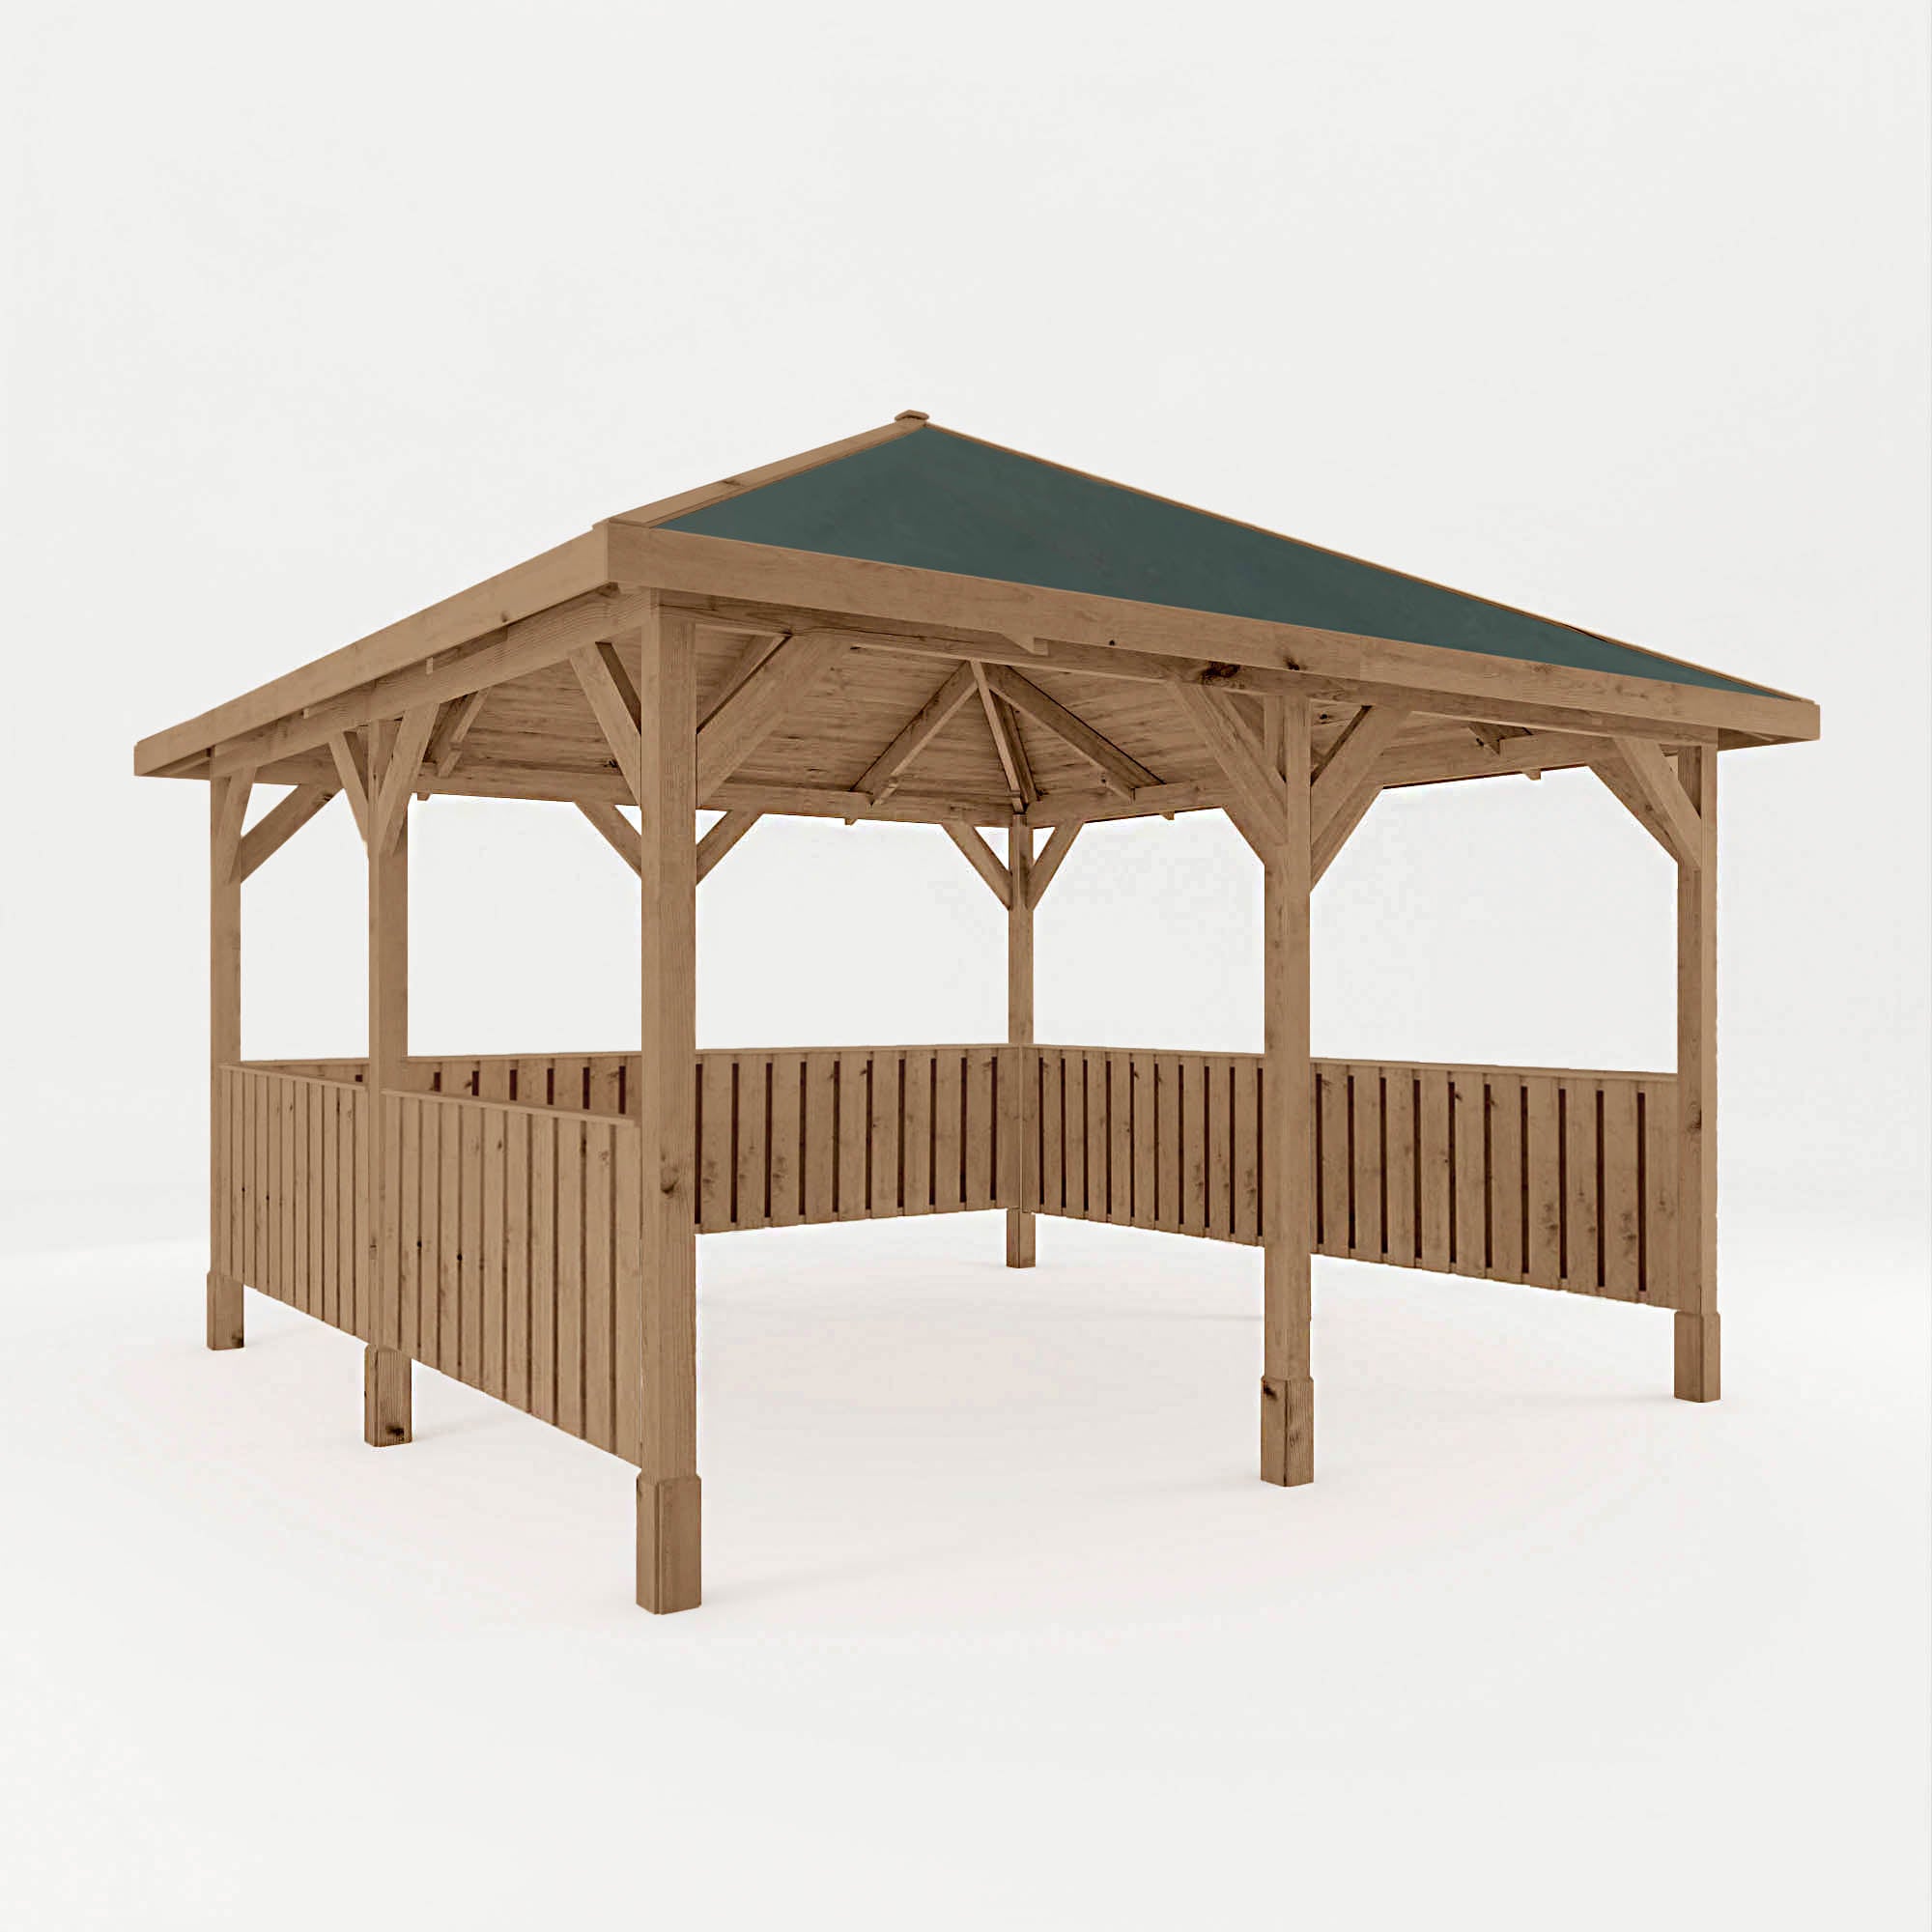 4m x 4m Pressure Treated Gazebo with Roof and Vertical Rails